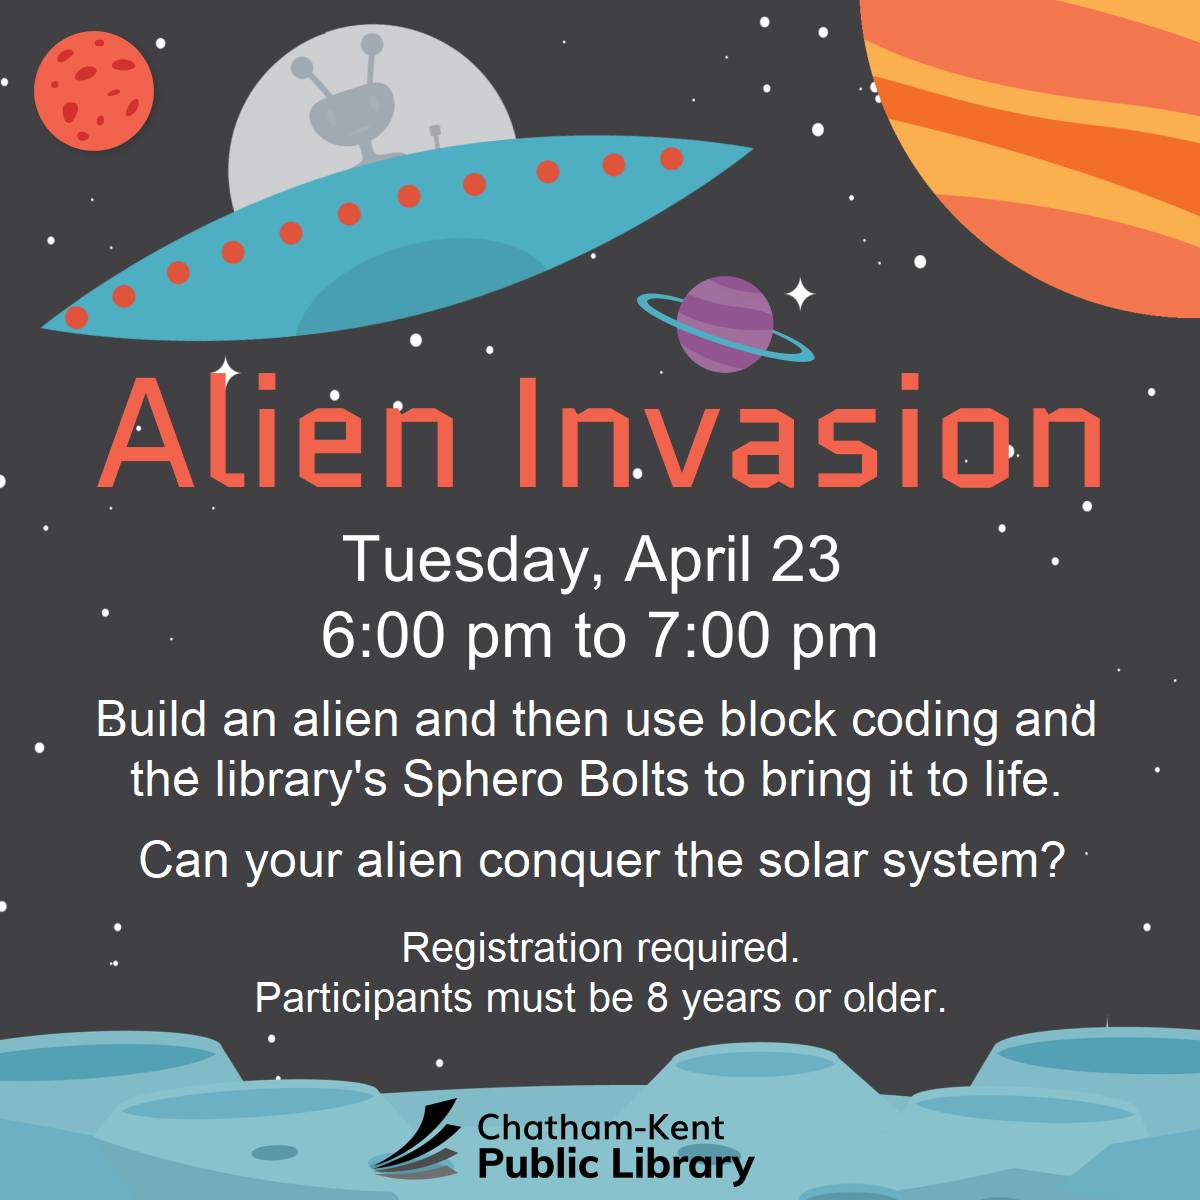 Join the CKPL on Tuesday, April 23 at 6pm to build an alien and use block coding and the library's Sphero Bolts to bring them to life! Participants must be 8 years or older. Call (519-354-2940) to register. #YourTVCK #TrulyLocal #CKont #CKPL